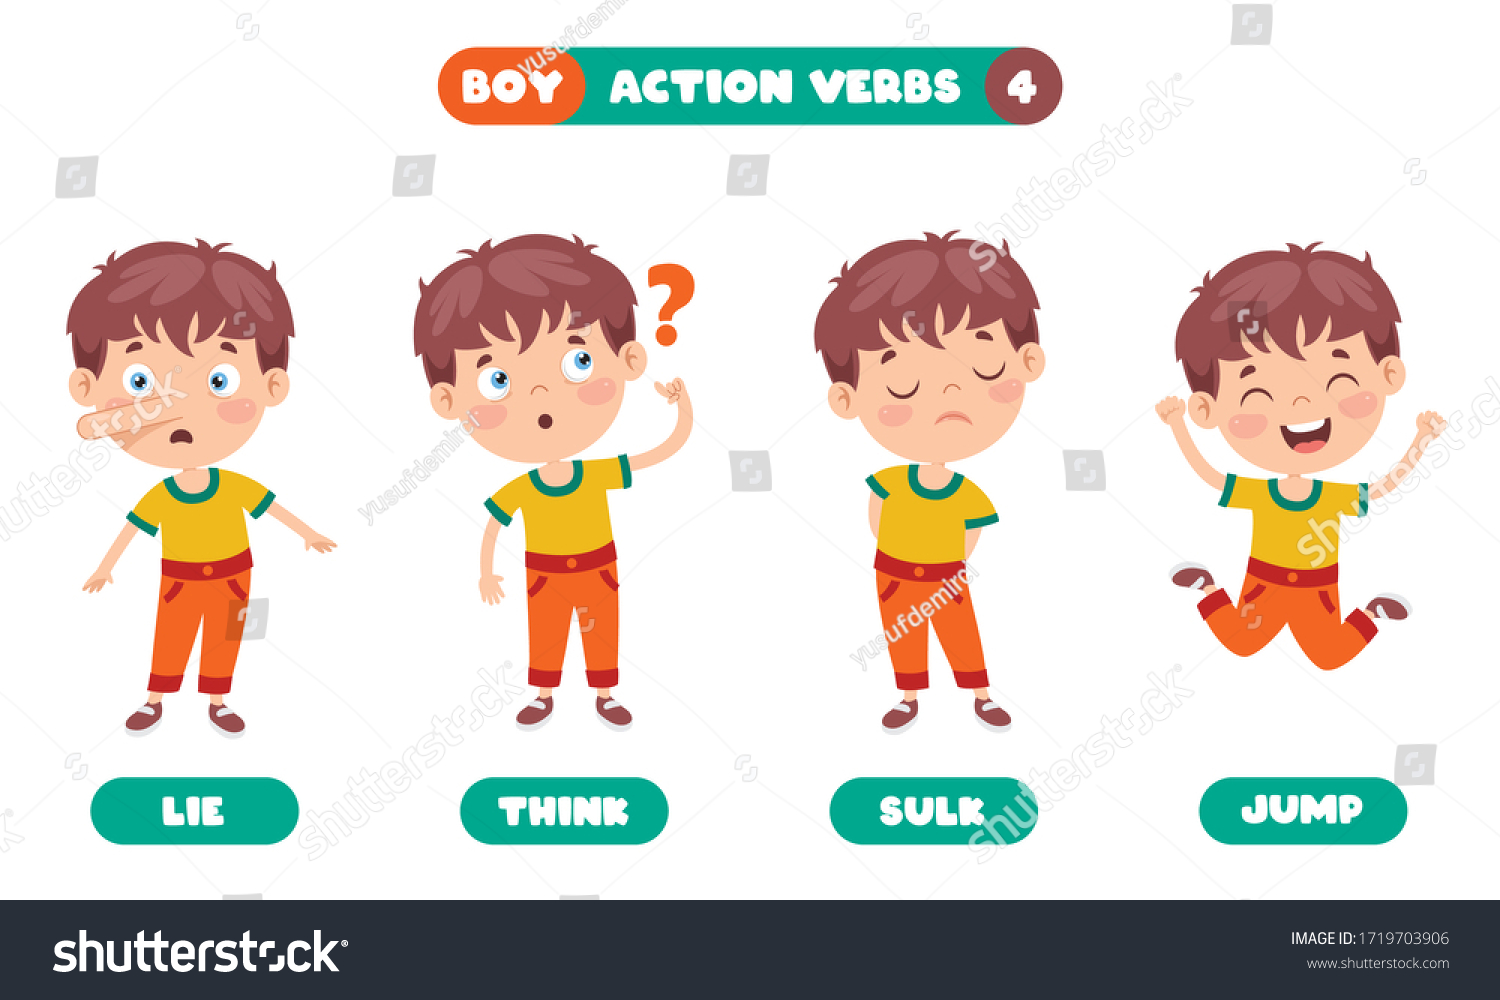 action-verbs-children-education-stock-vector-royalty-free-1719703906